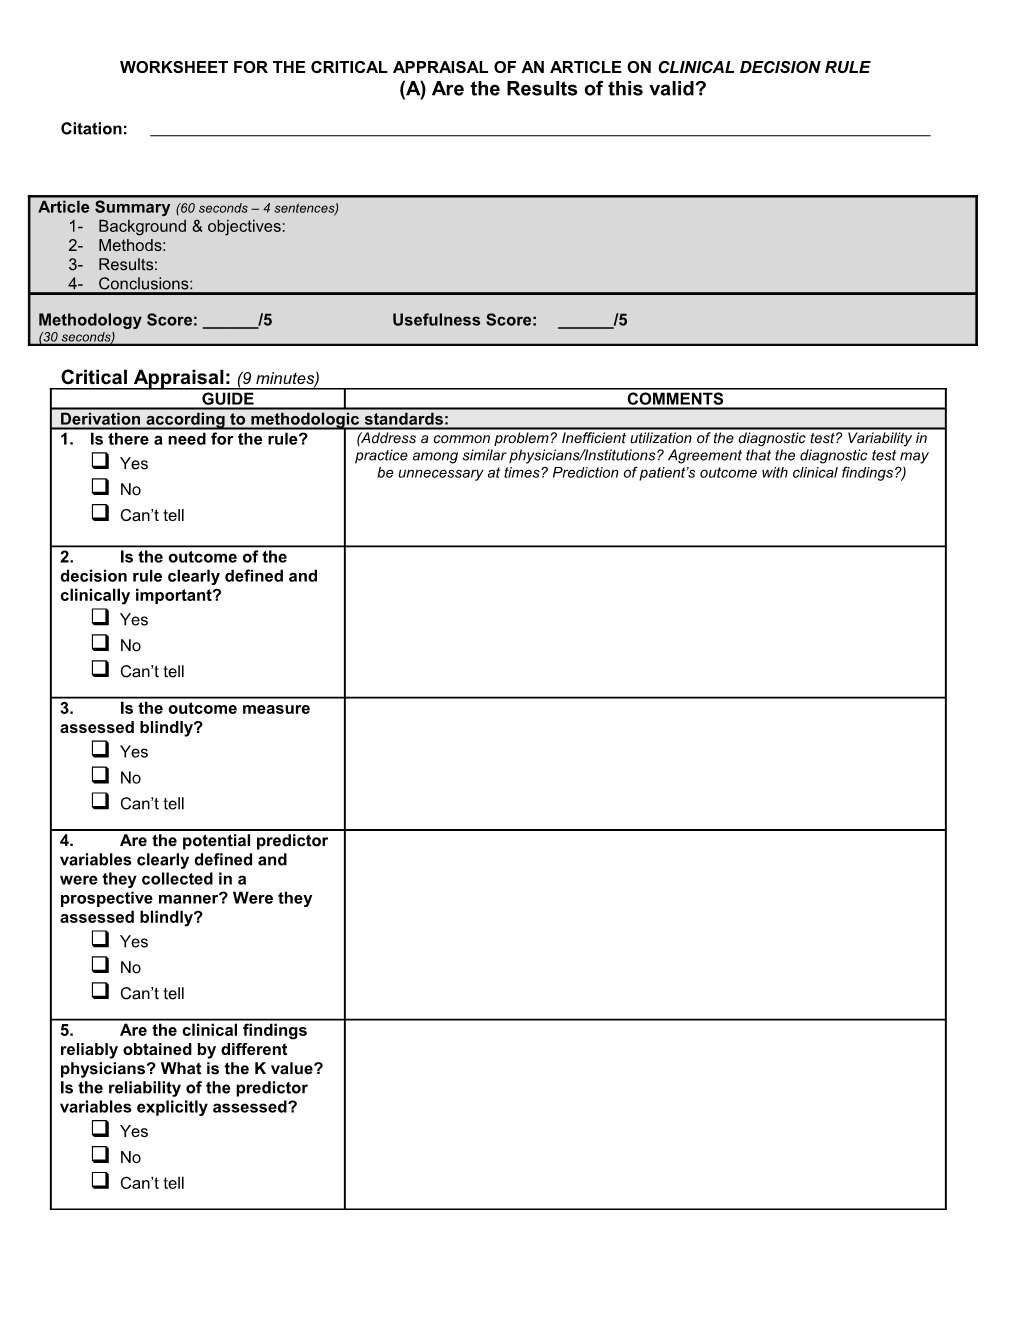 Worksheet for the Critical Appraisal of an Article About a Diagnostic Test